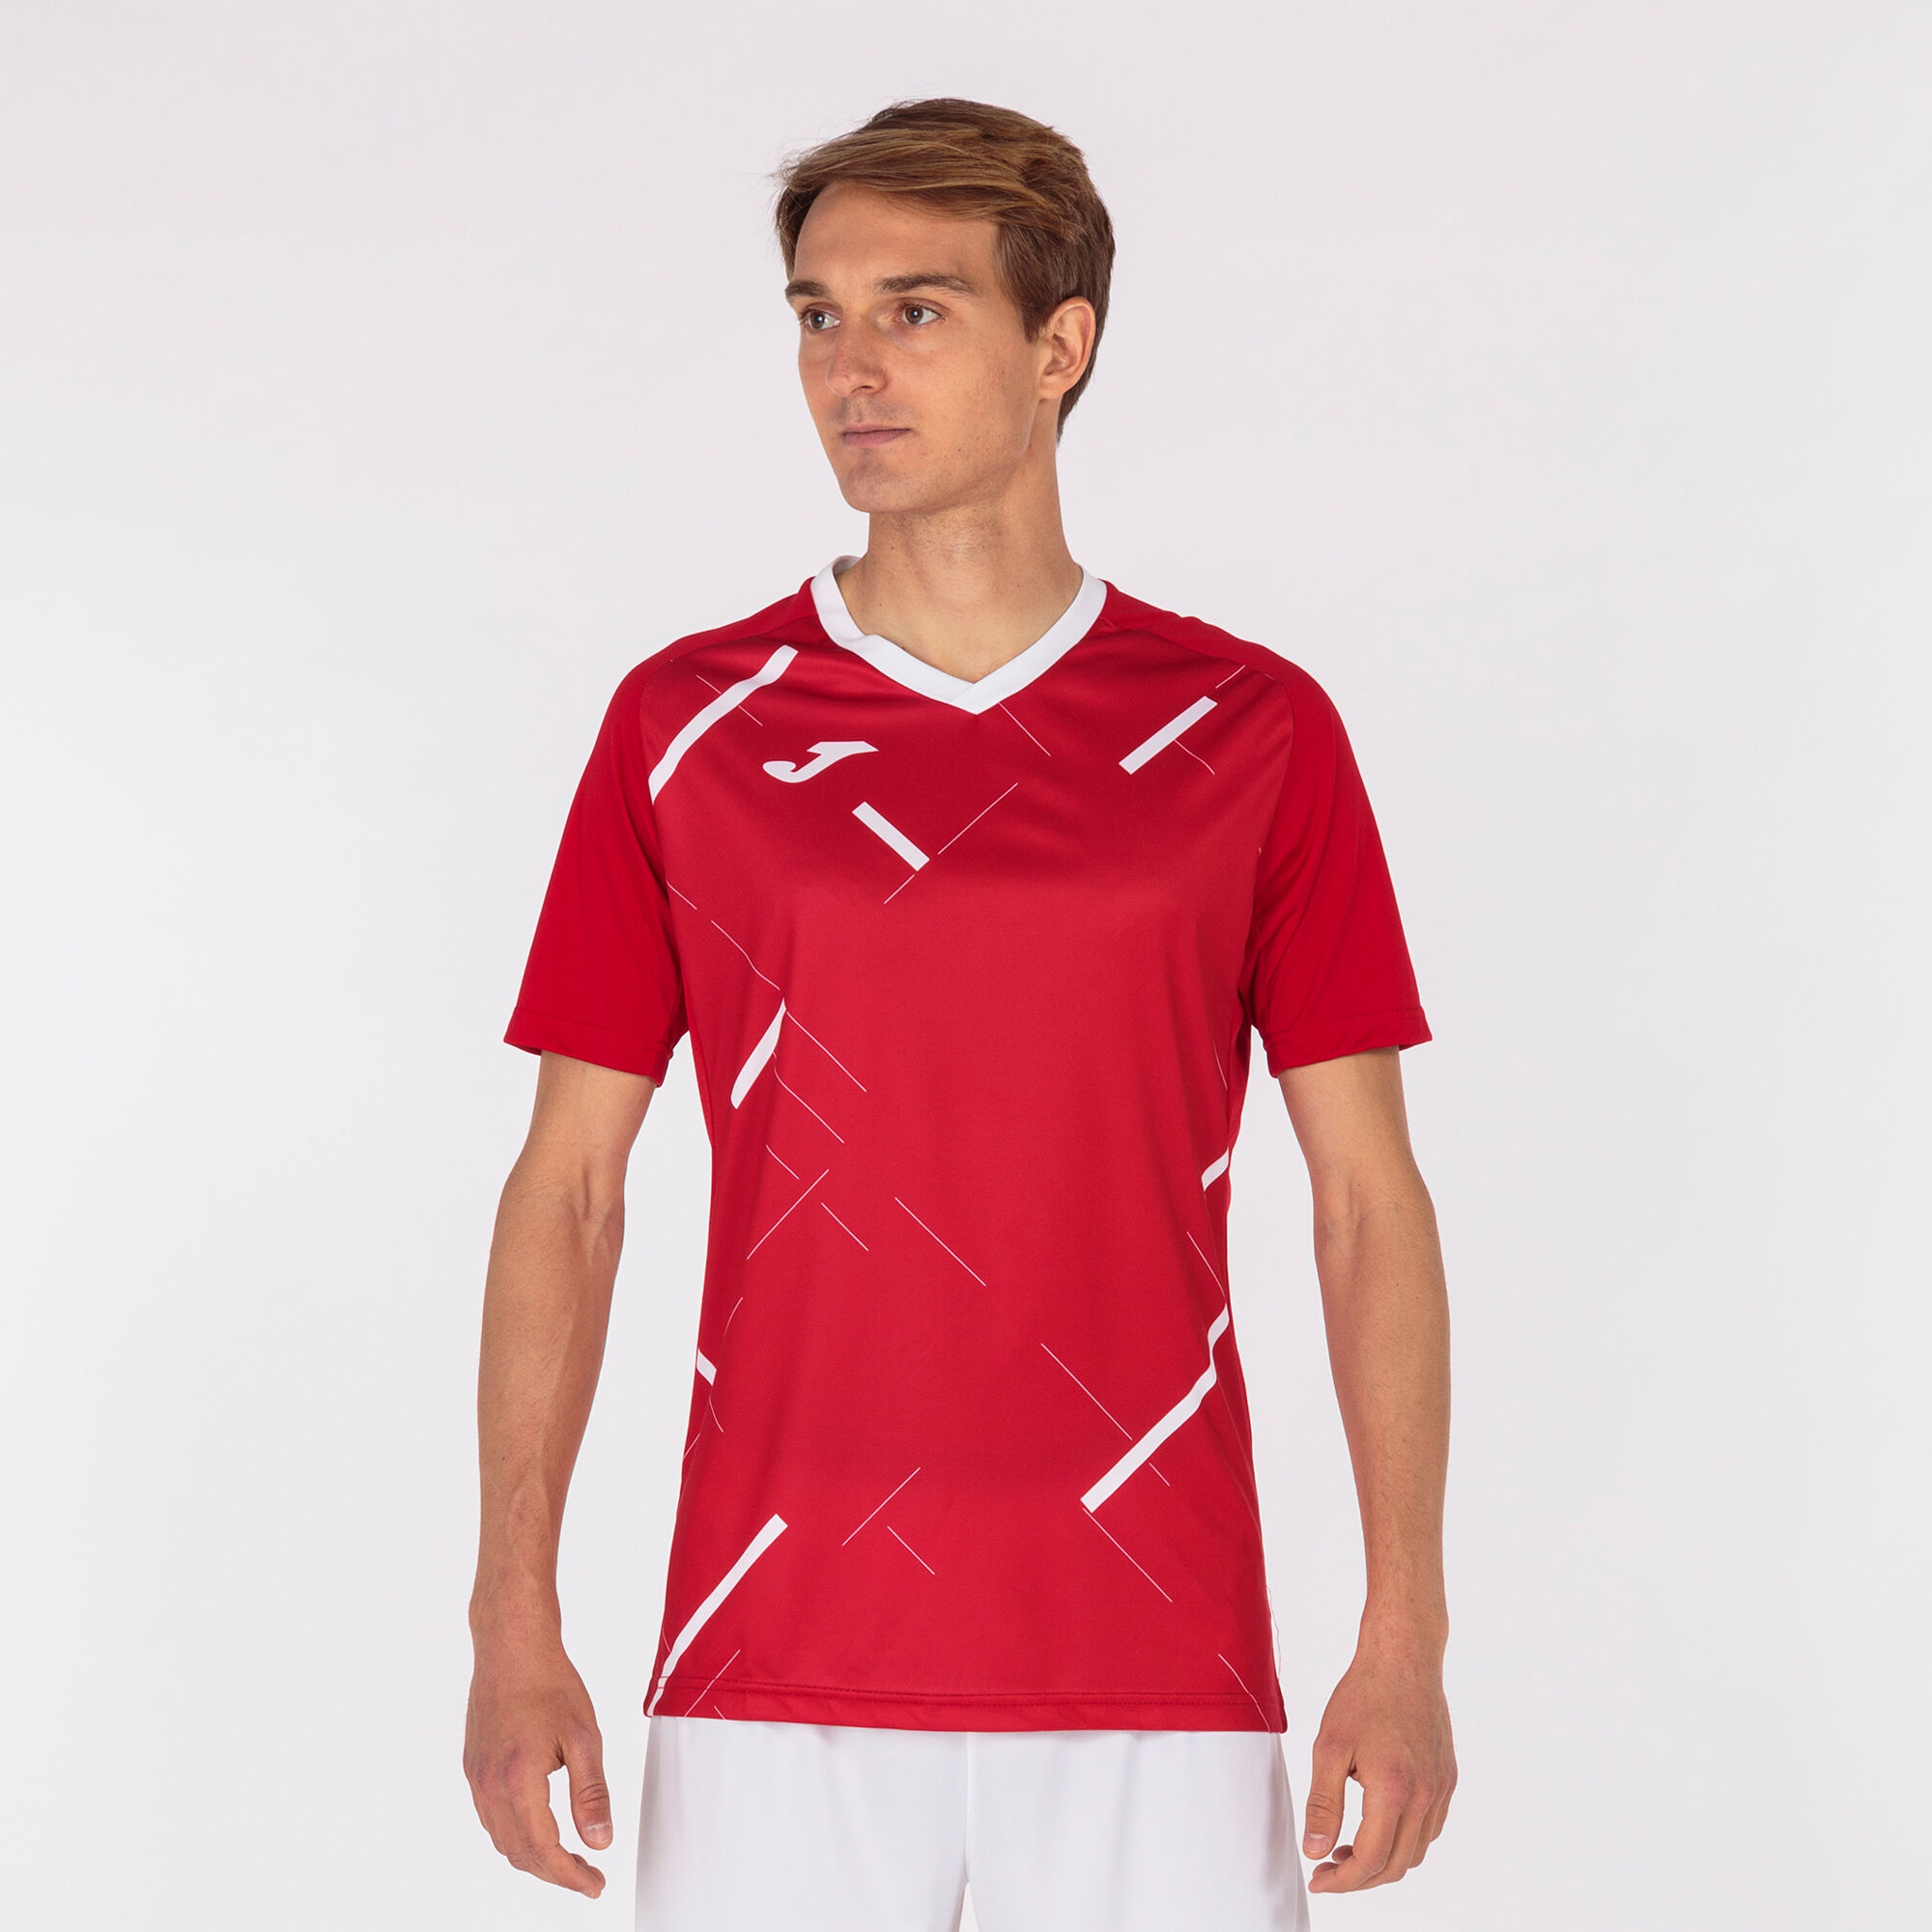 Maillot manches courtes homme Tiger III rouge blanc